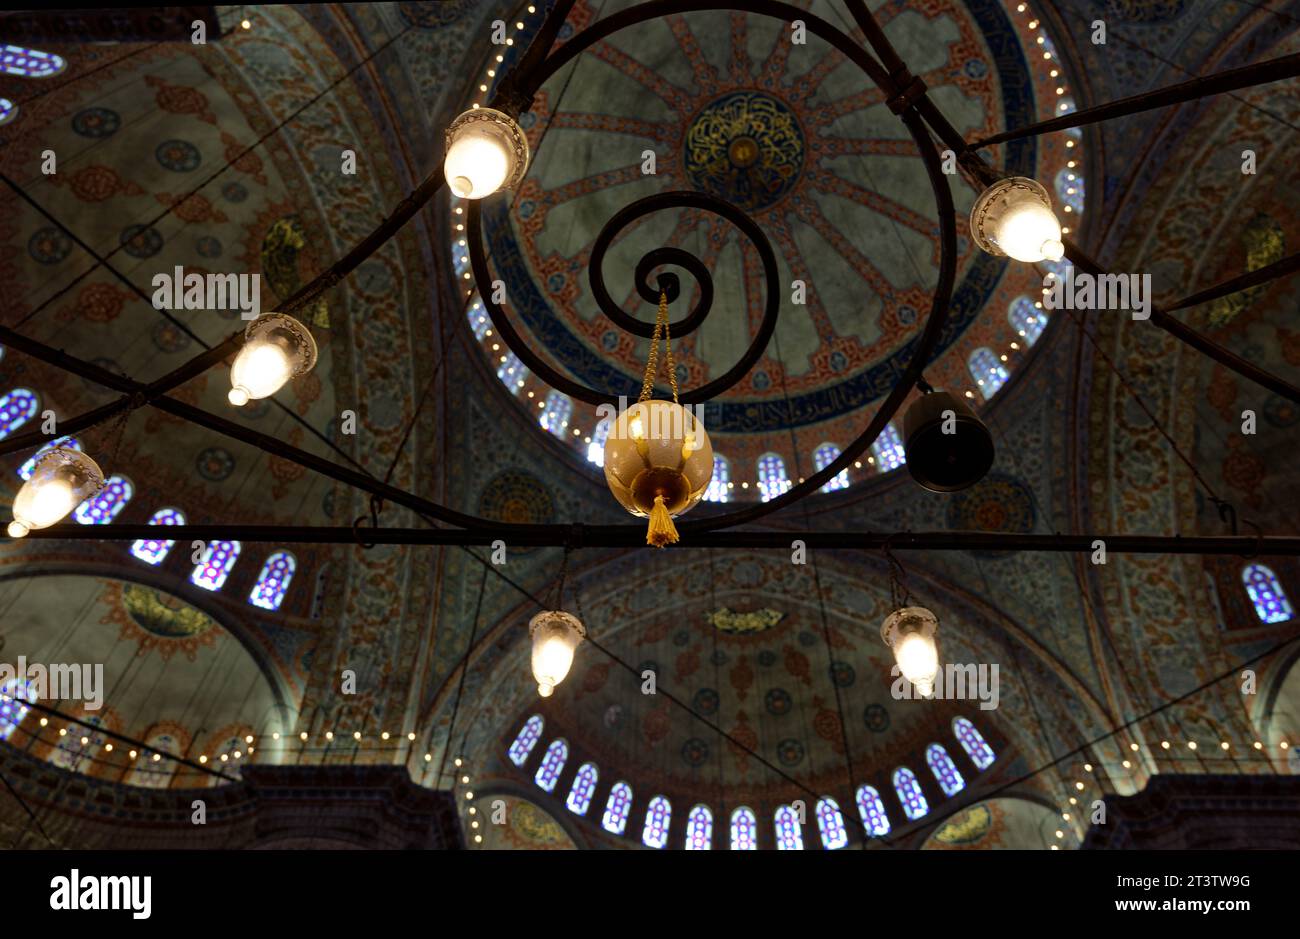 Intricate light fixtures and detailed adornments highlight the interior of the Blue Mosque, all set against the vibrant mosaic ceiling as a backdrop. Stock Photo